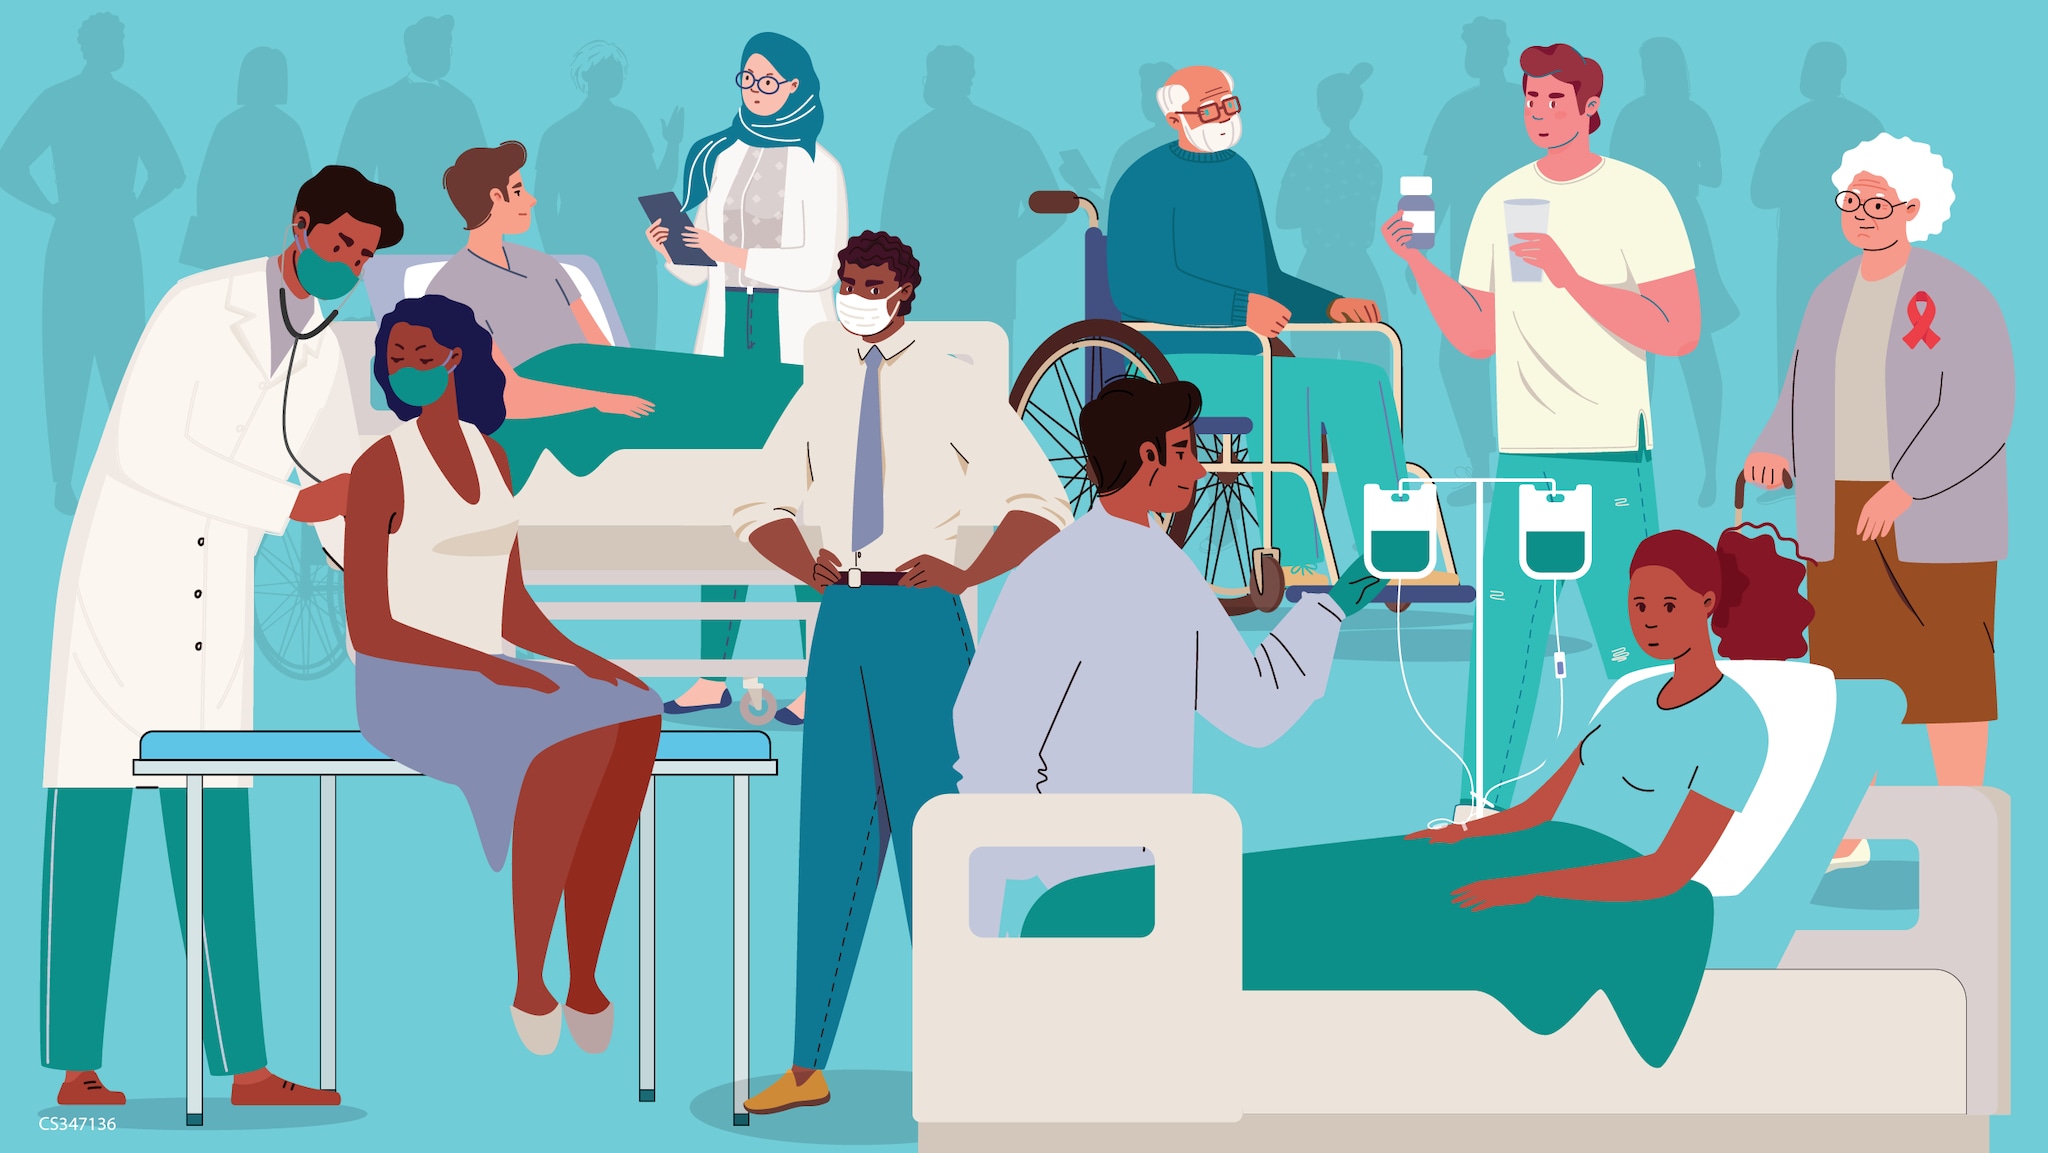 Illustration collage of people with medical conditions